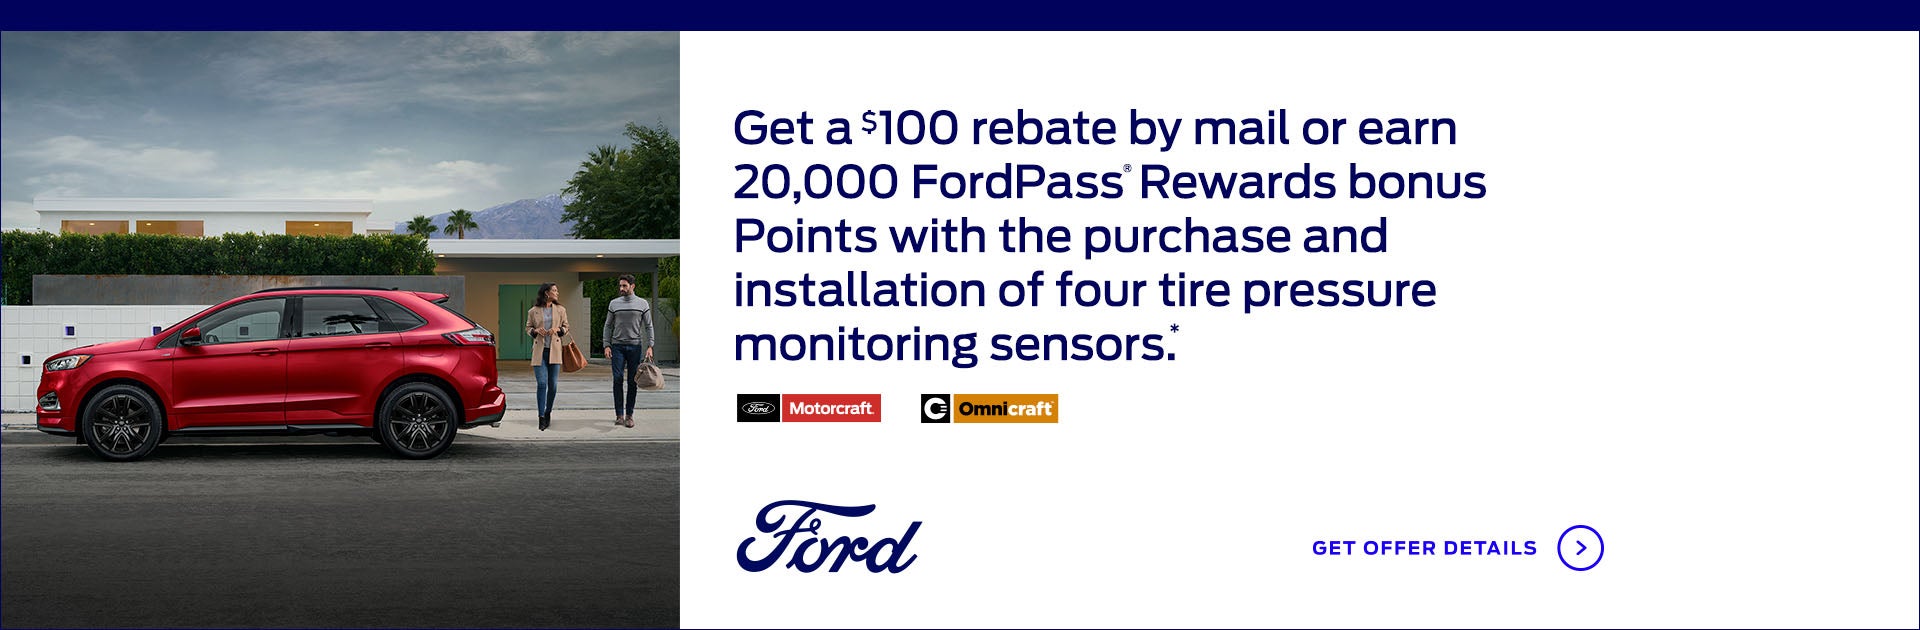 $100 rebate at Whiteface Ford Hereford TX 